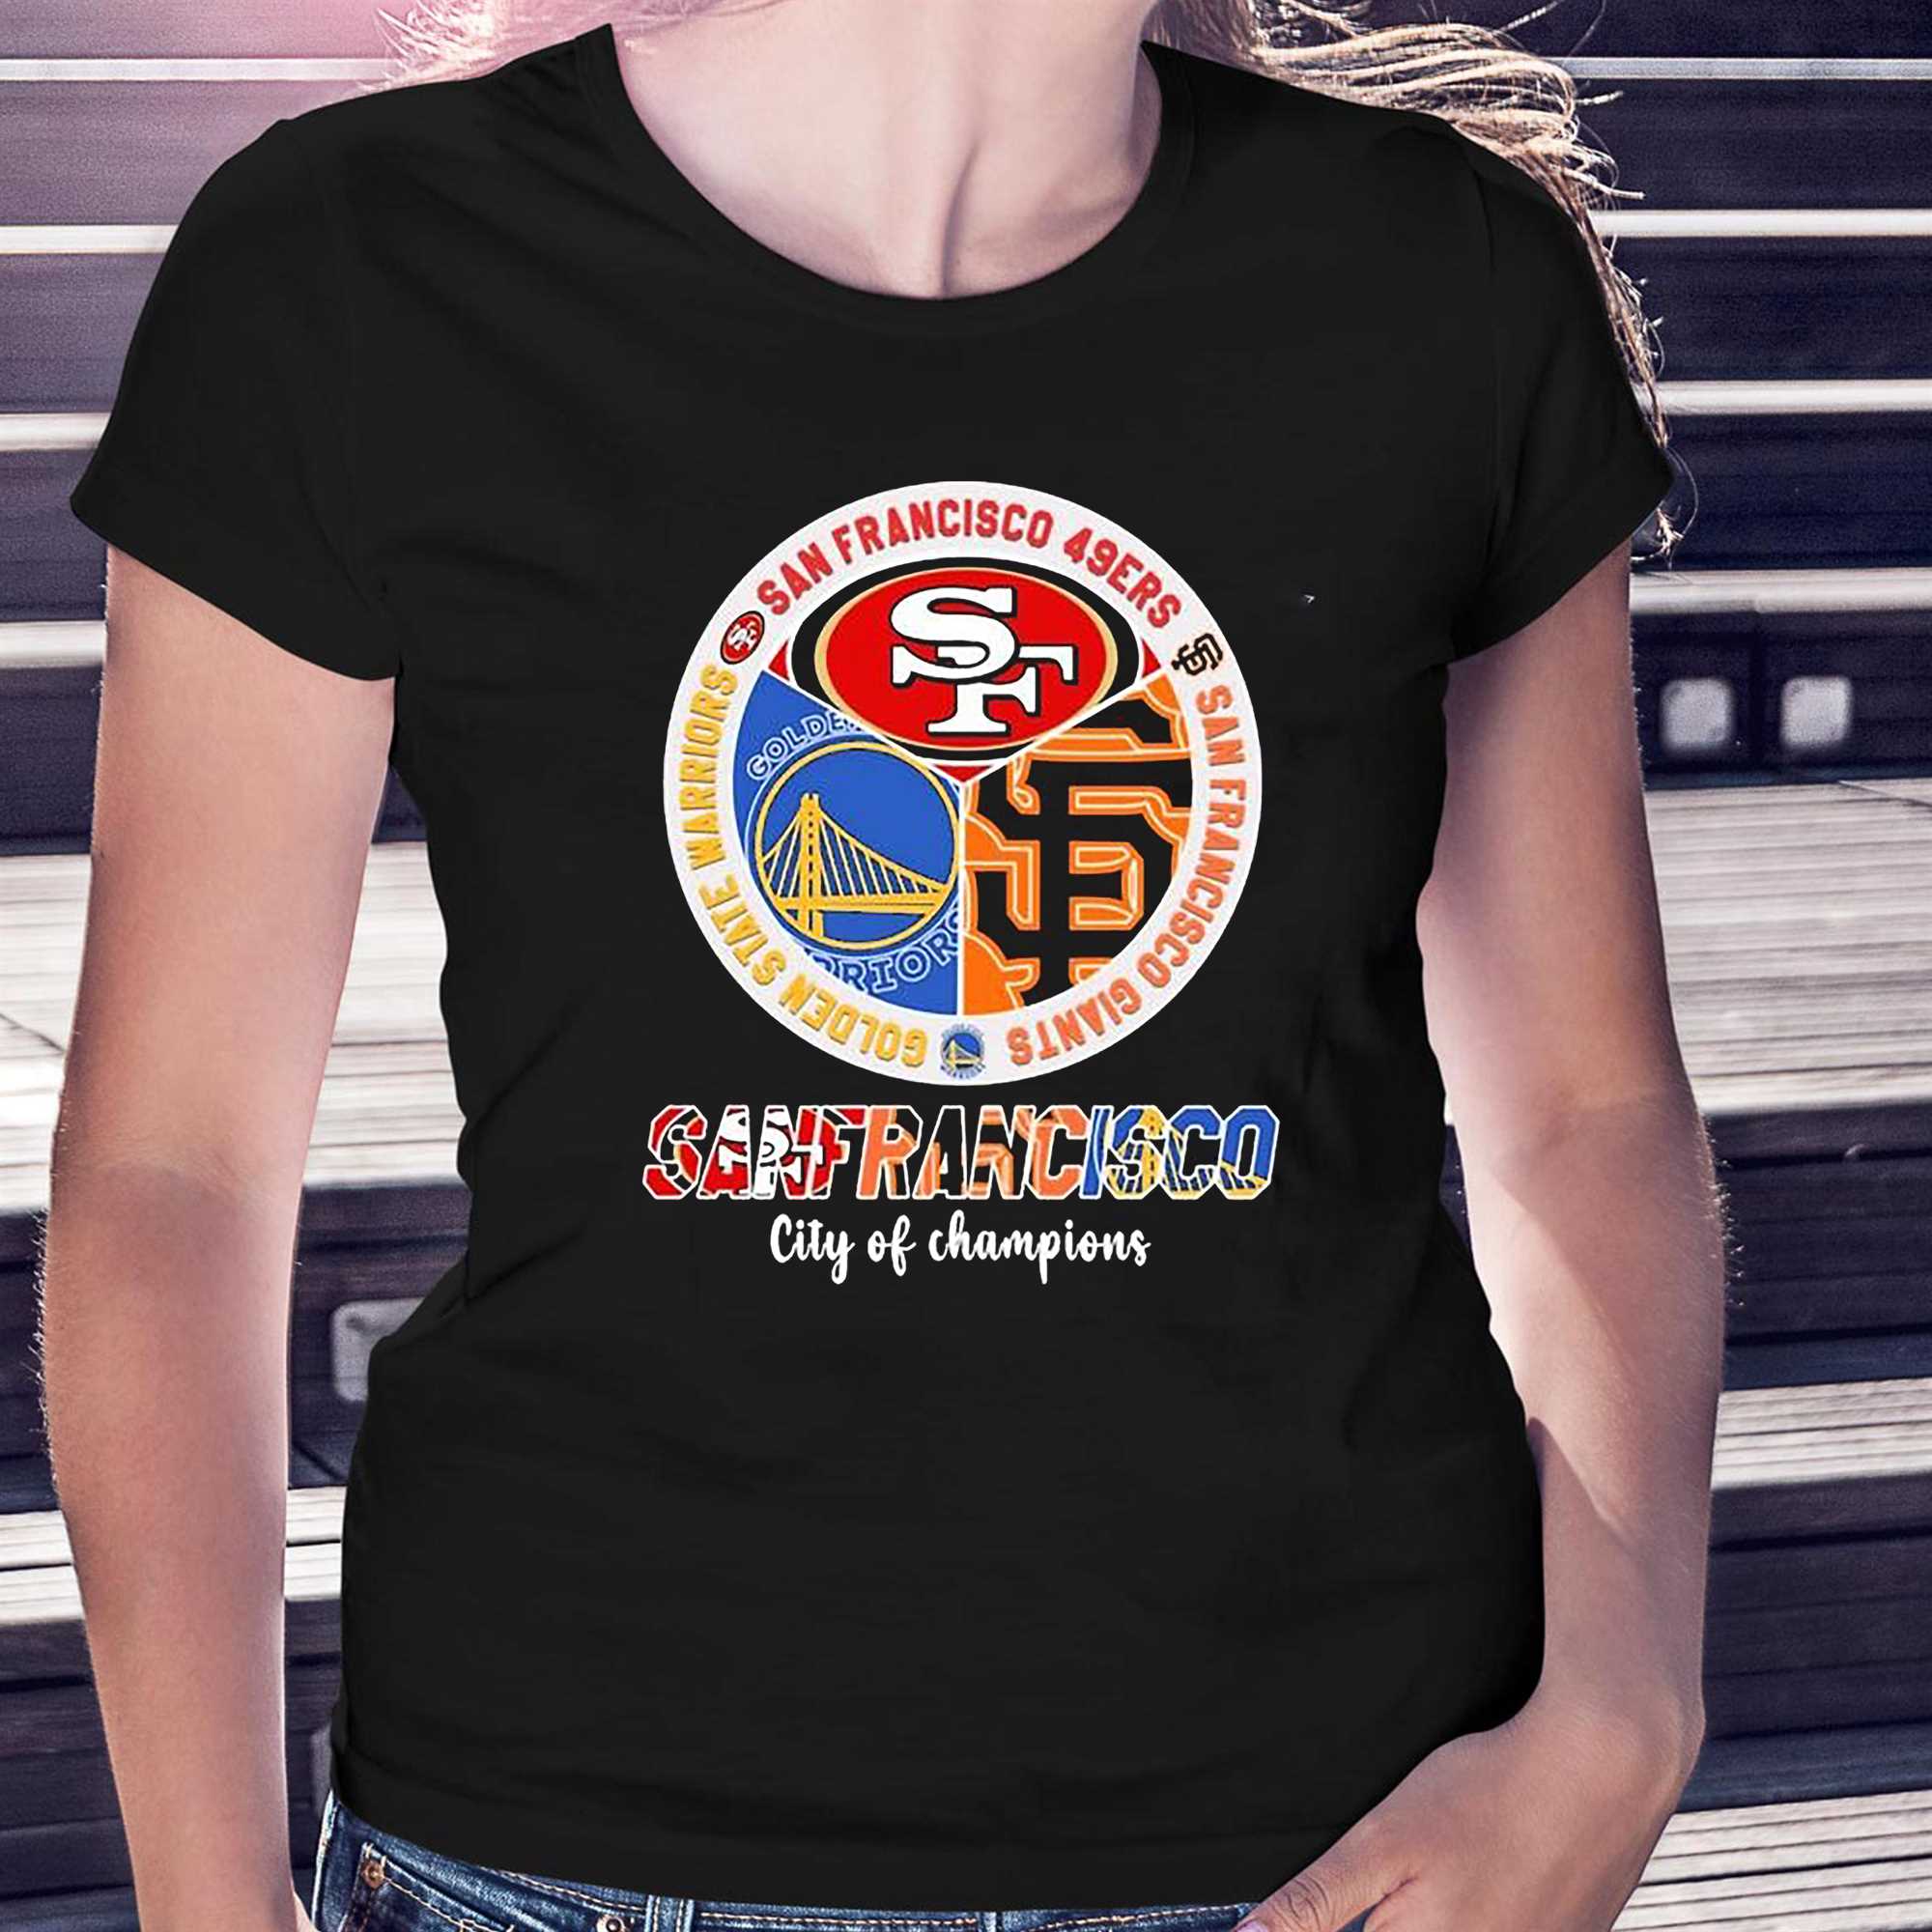 San Francisco City Of Champions Shirt 49ers Warriors And Giants - Shibtee  Clothing